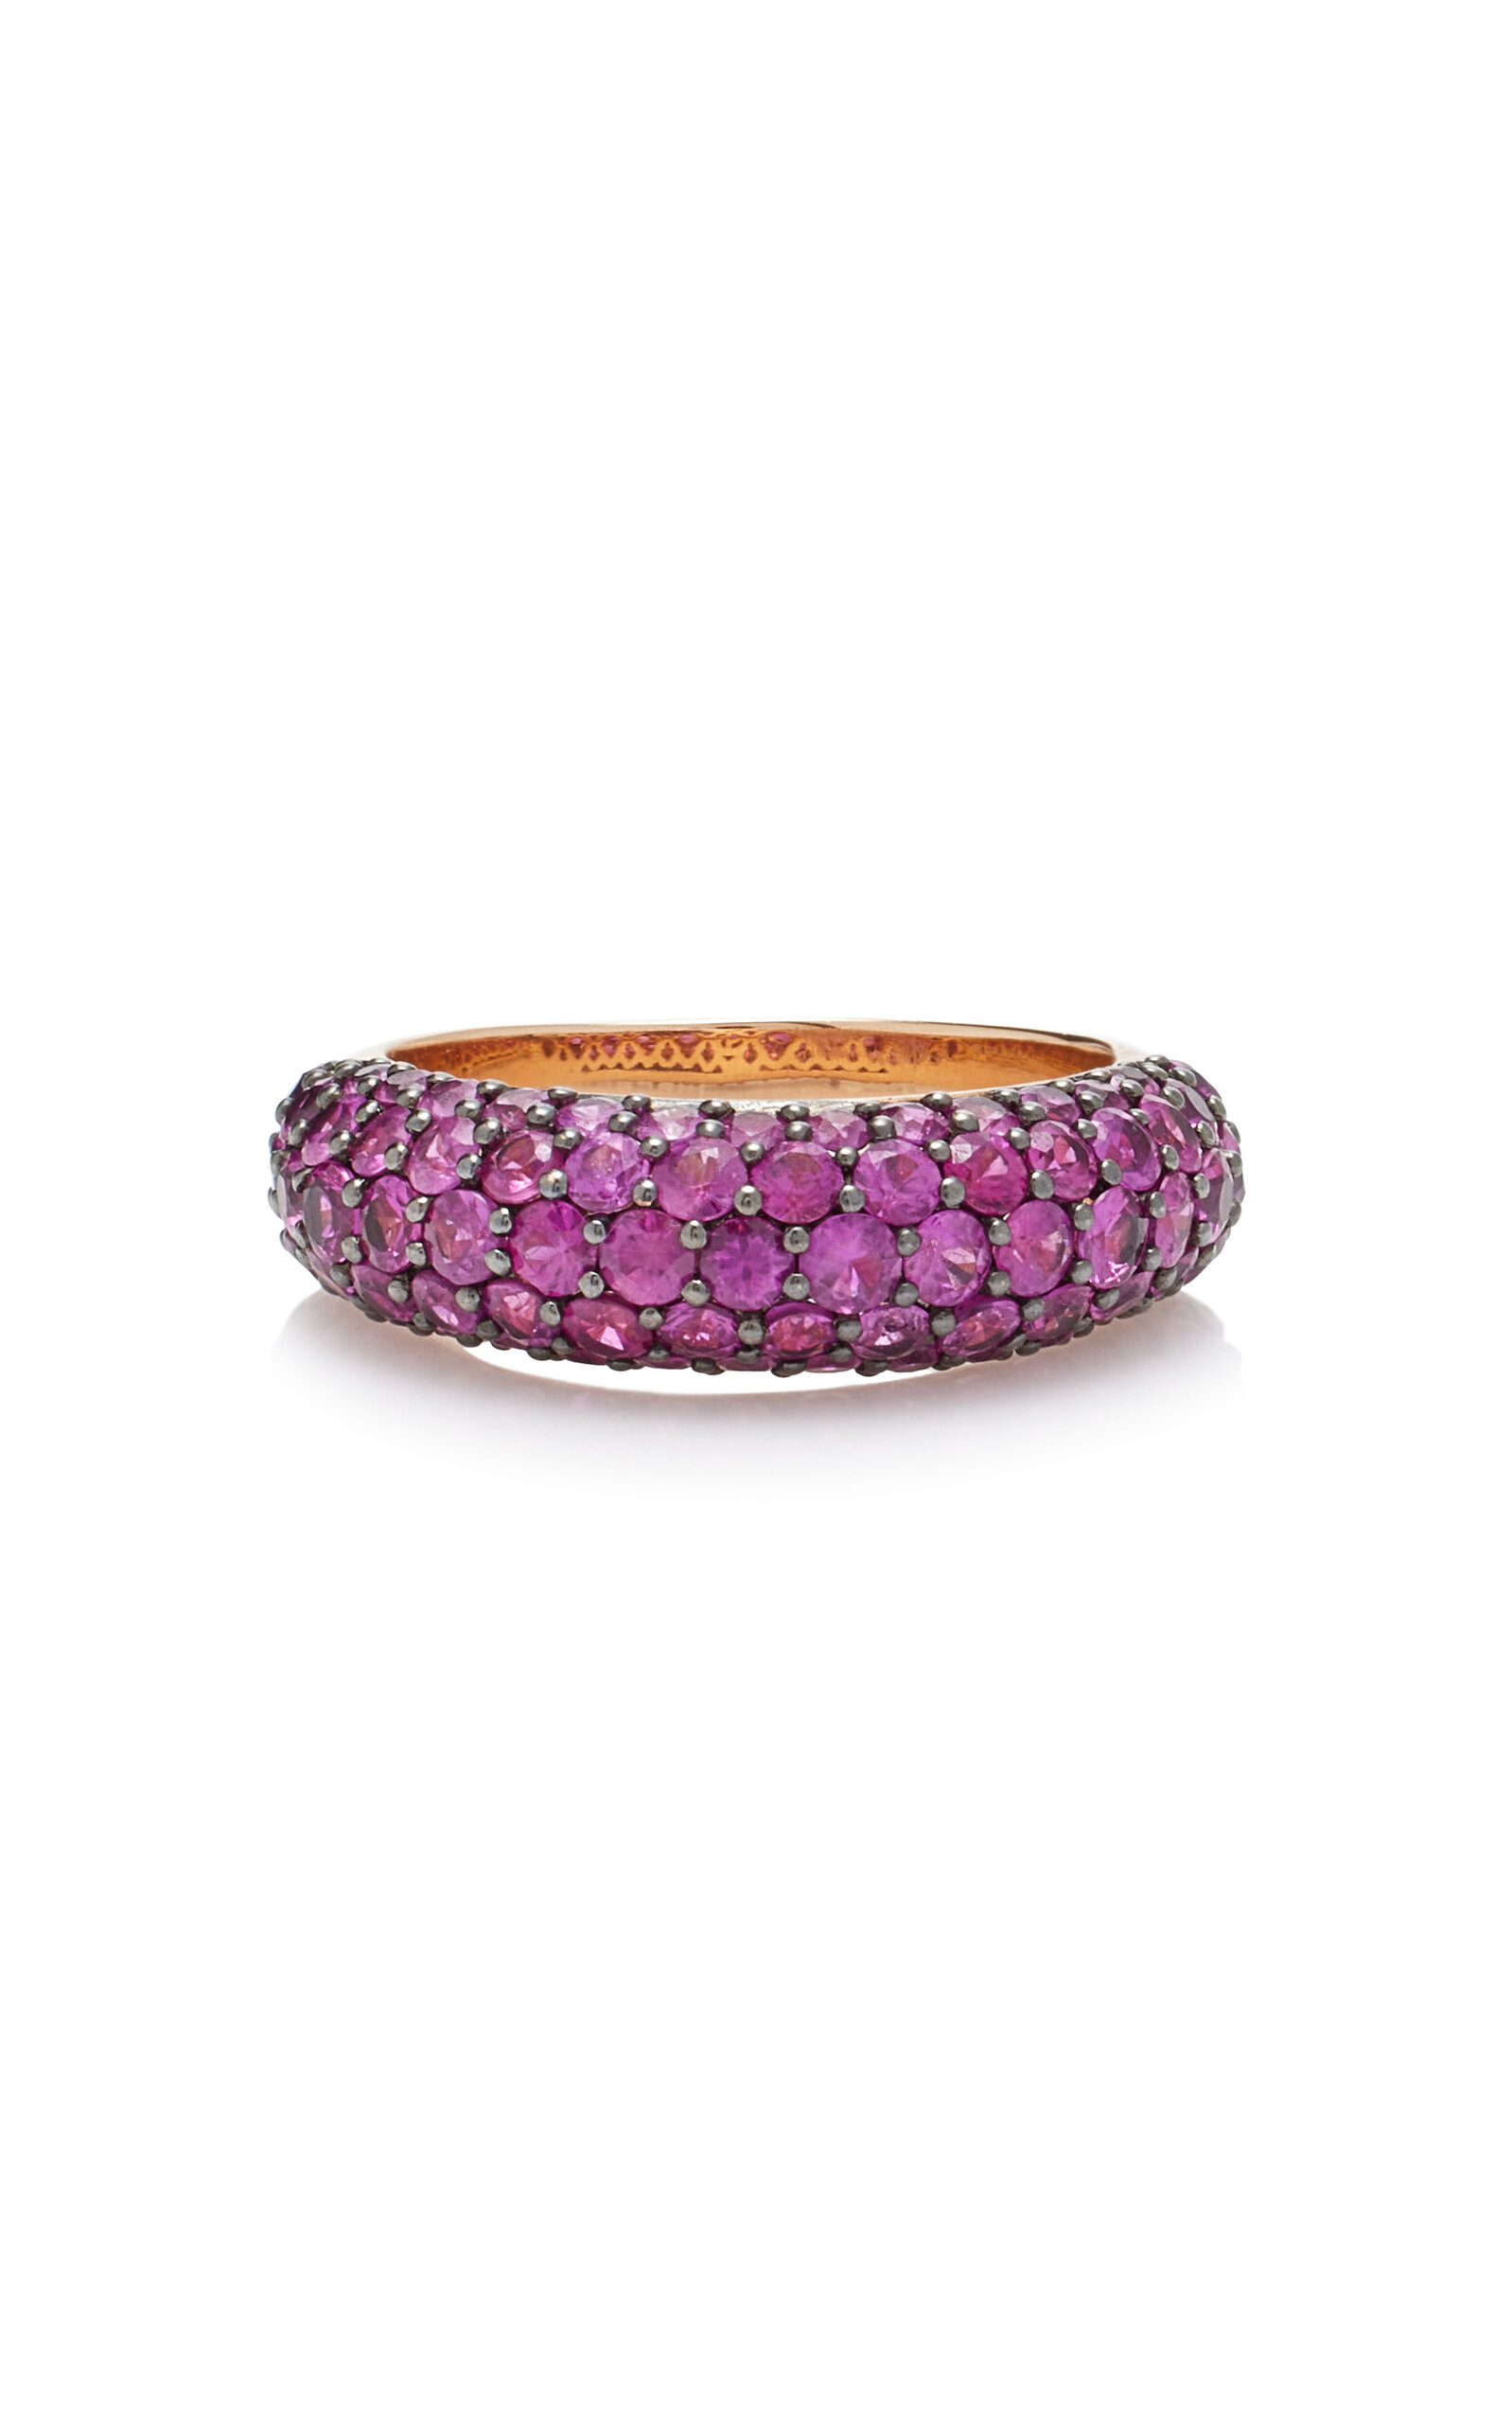 Piranesi Women's 18K Gold Small Dome Ring in Deep Pink Sapphire